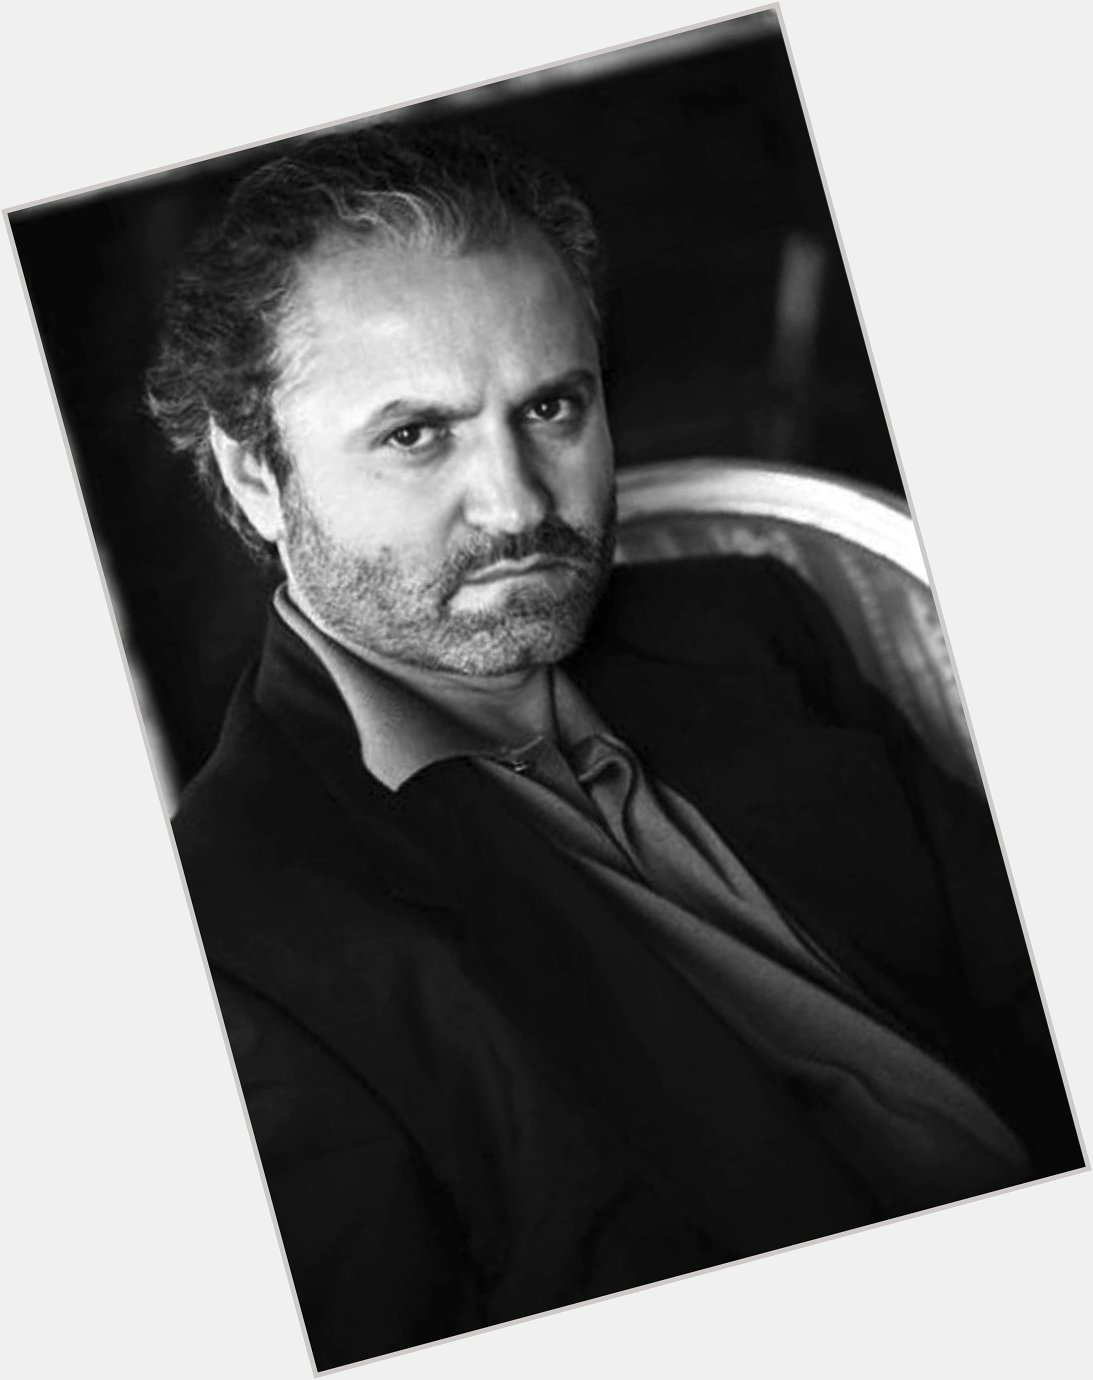 Happy Birthday Gianni Versace. Today would be his 75th. 